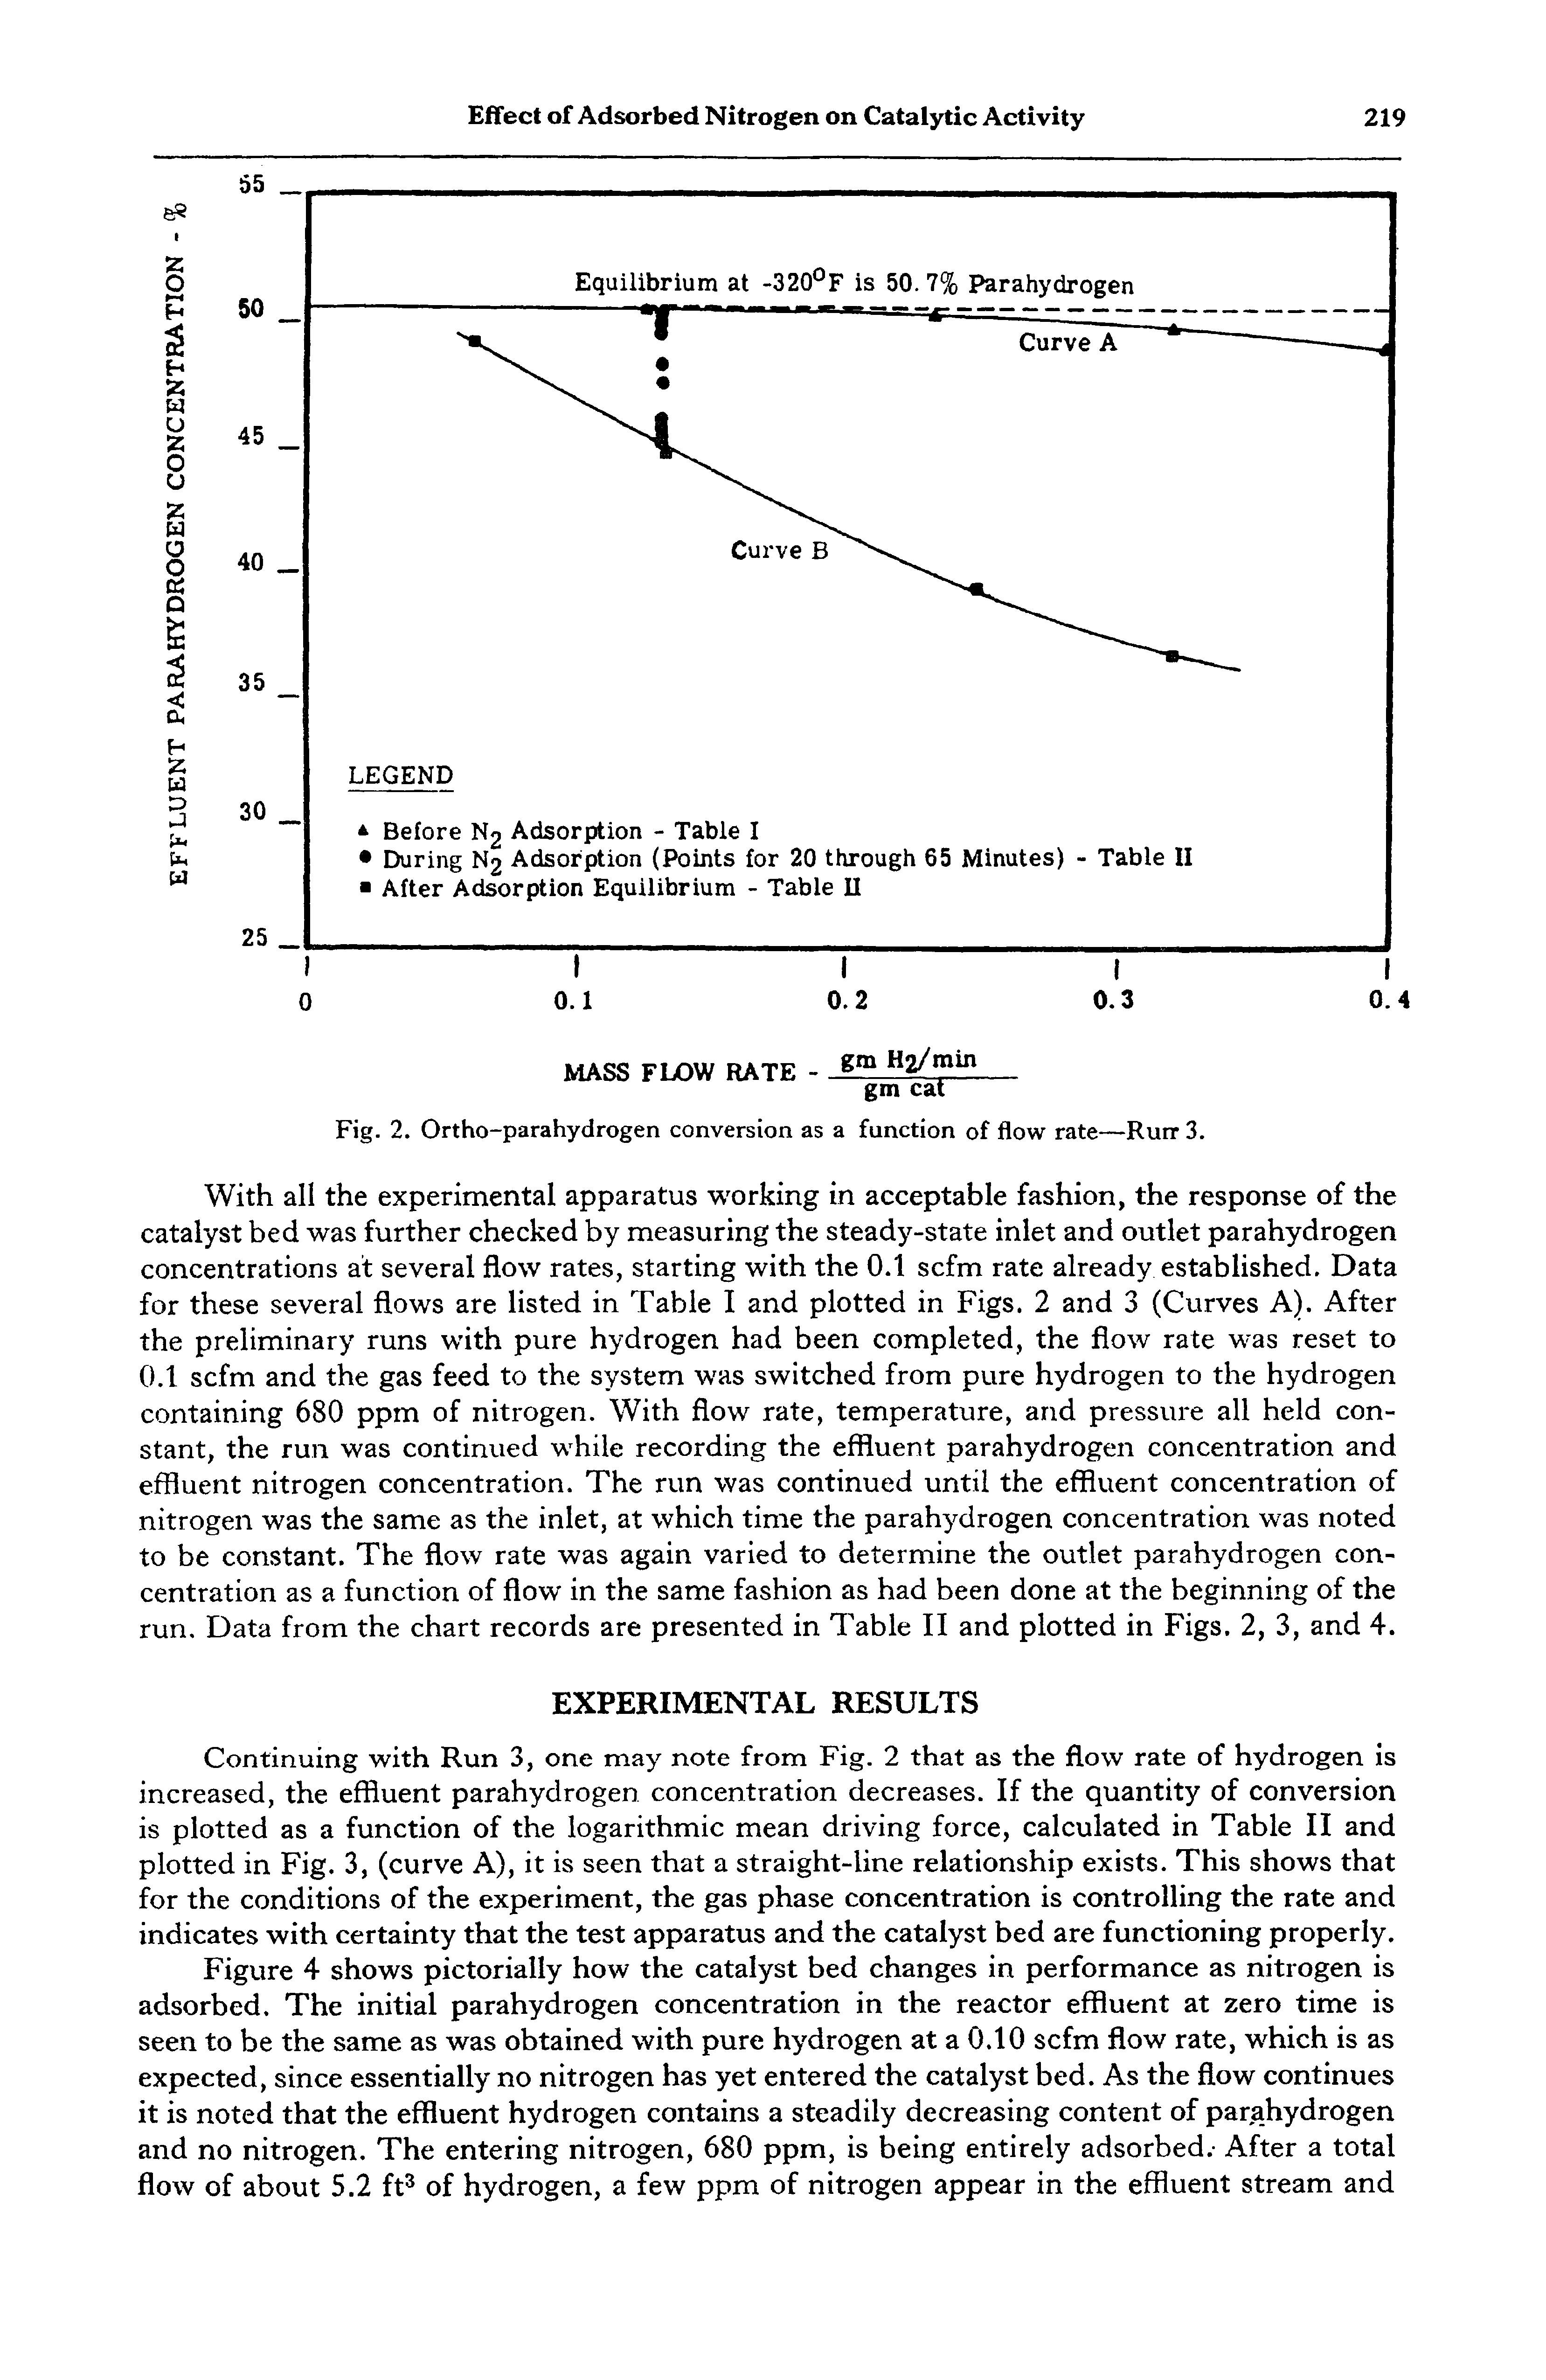 Fig. 2. Ortho-parahydrogen conversion as a function of flow rate—Rutr 3.